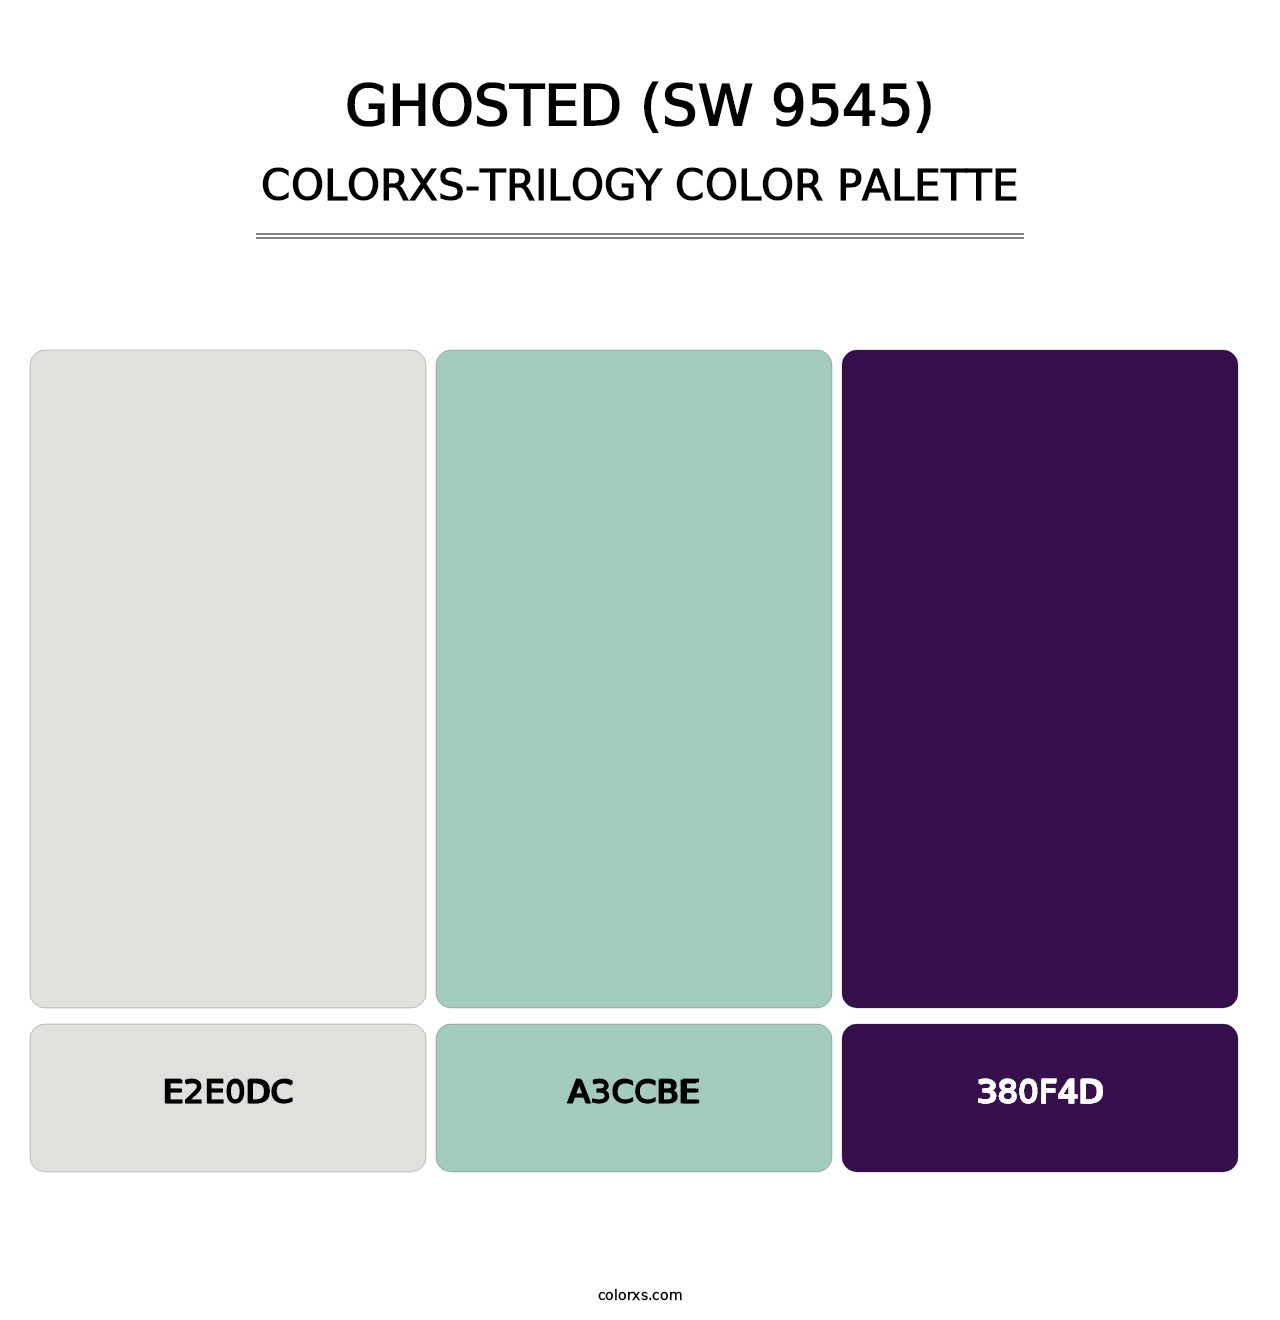 Ghosted (SW 9545) - Colorxs Trilogy Palette